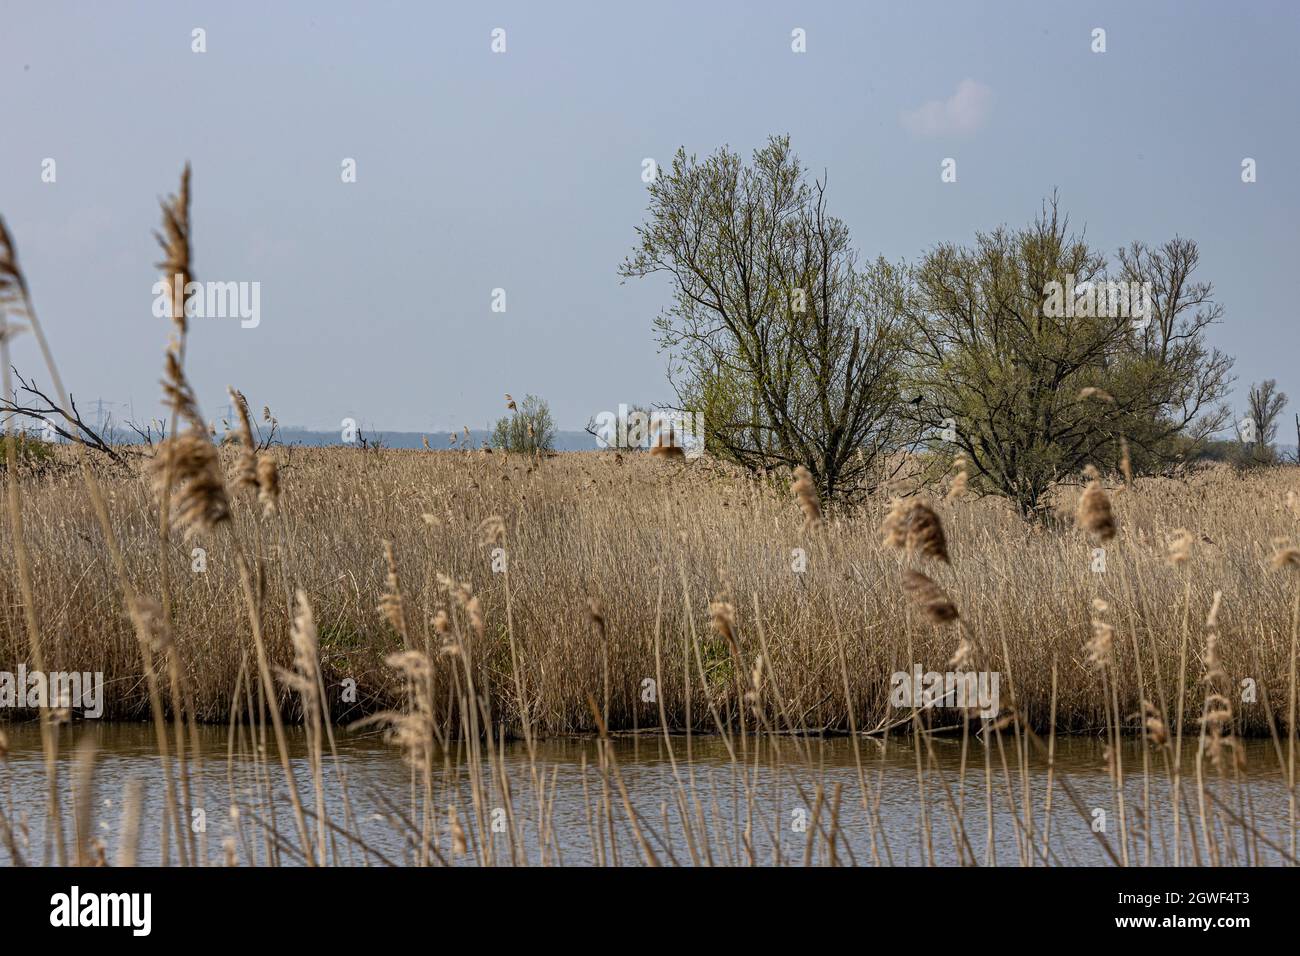 Brown wild grass, a stream and swampy terrain in the Oostvaardersplassen nature reserve, some green trees in the background, sunny day with a blue sky Stock Photo